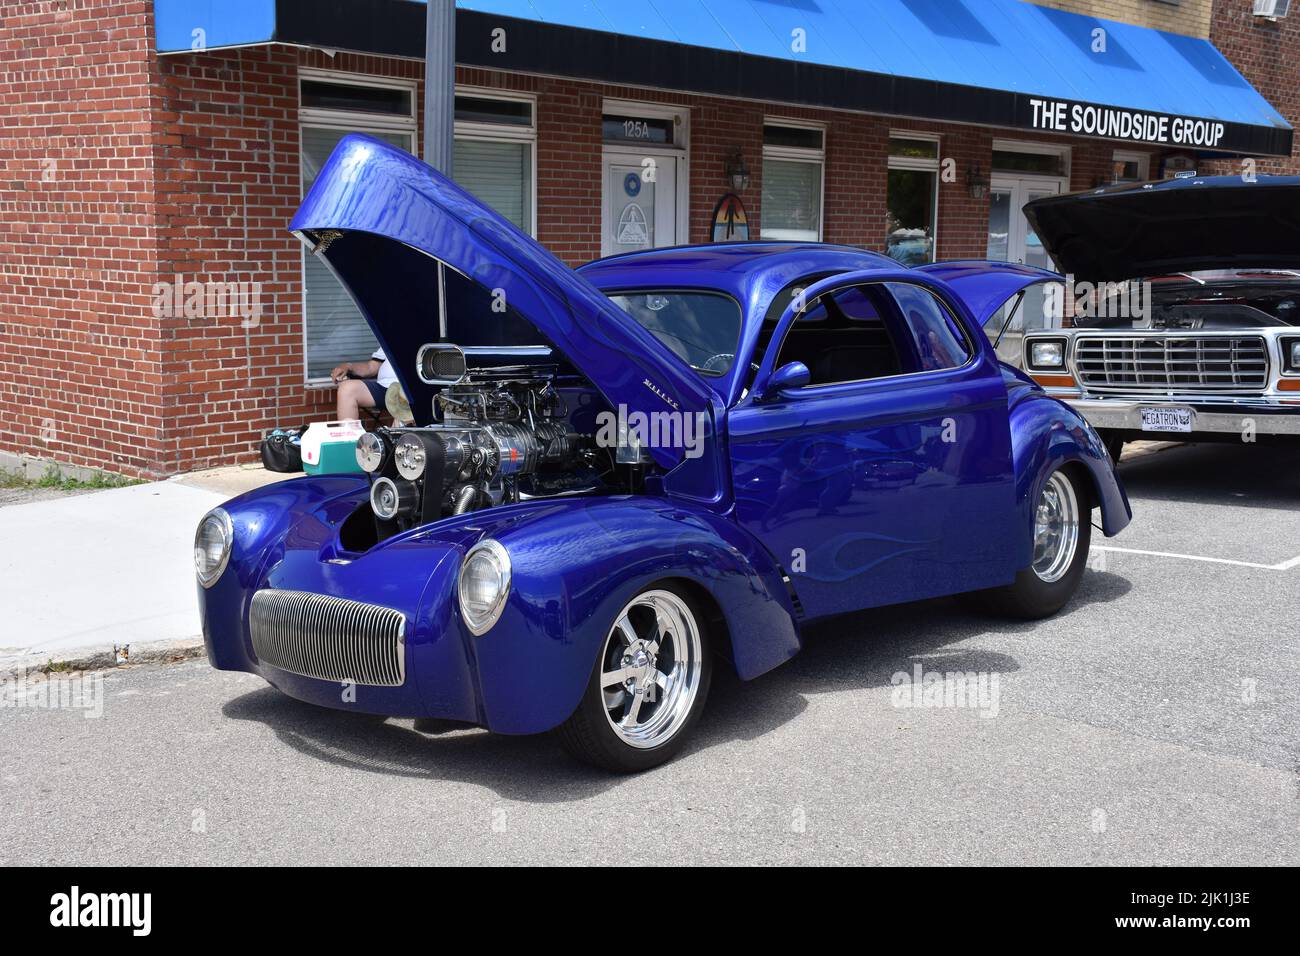 A Vintage Willys Restomod with a 454 Supercharged Engine on display at a car show. Stock Photo